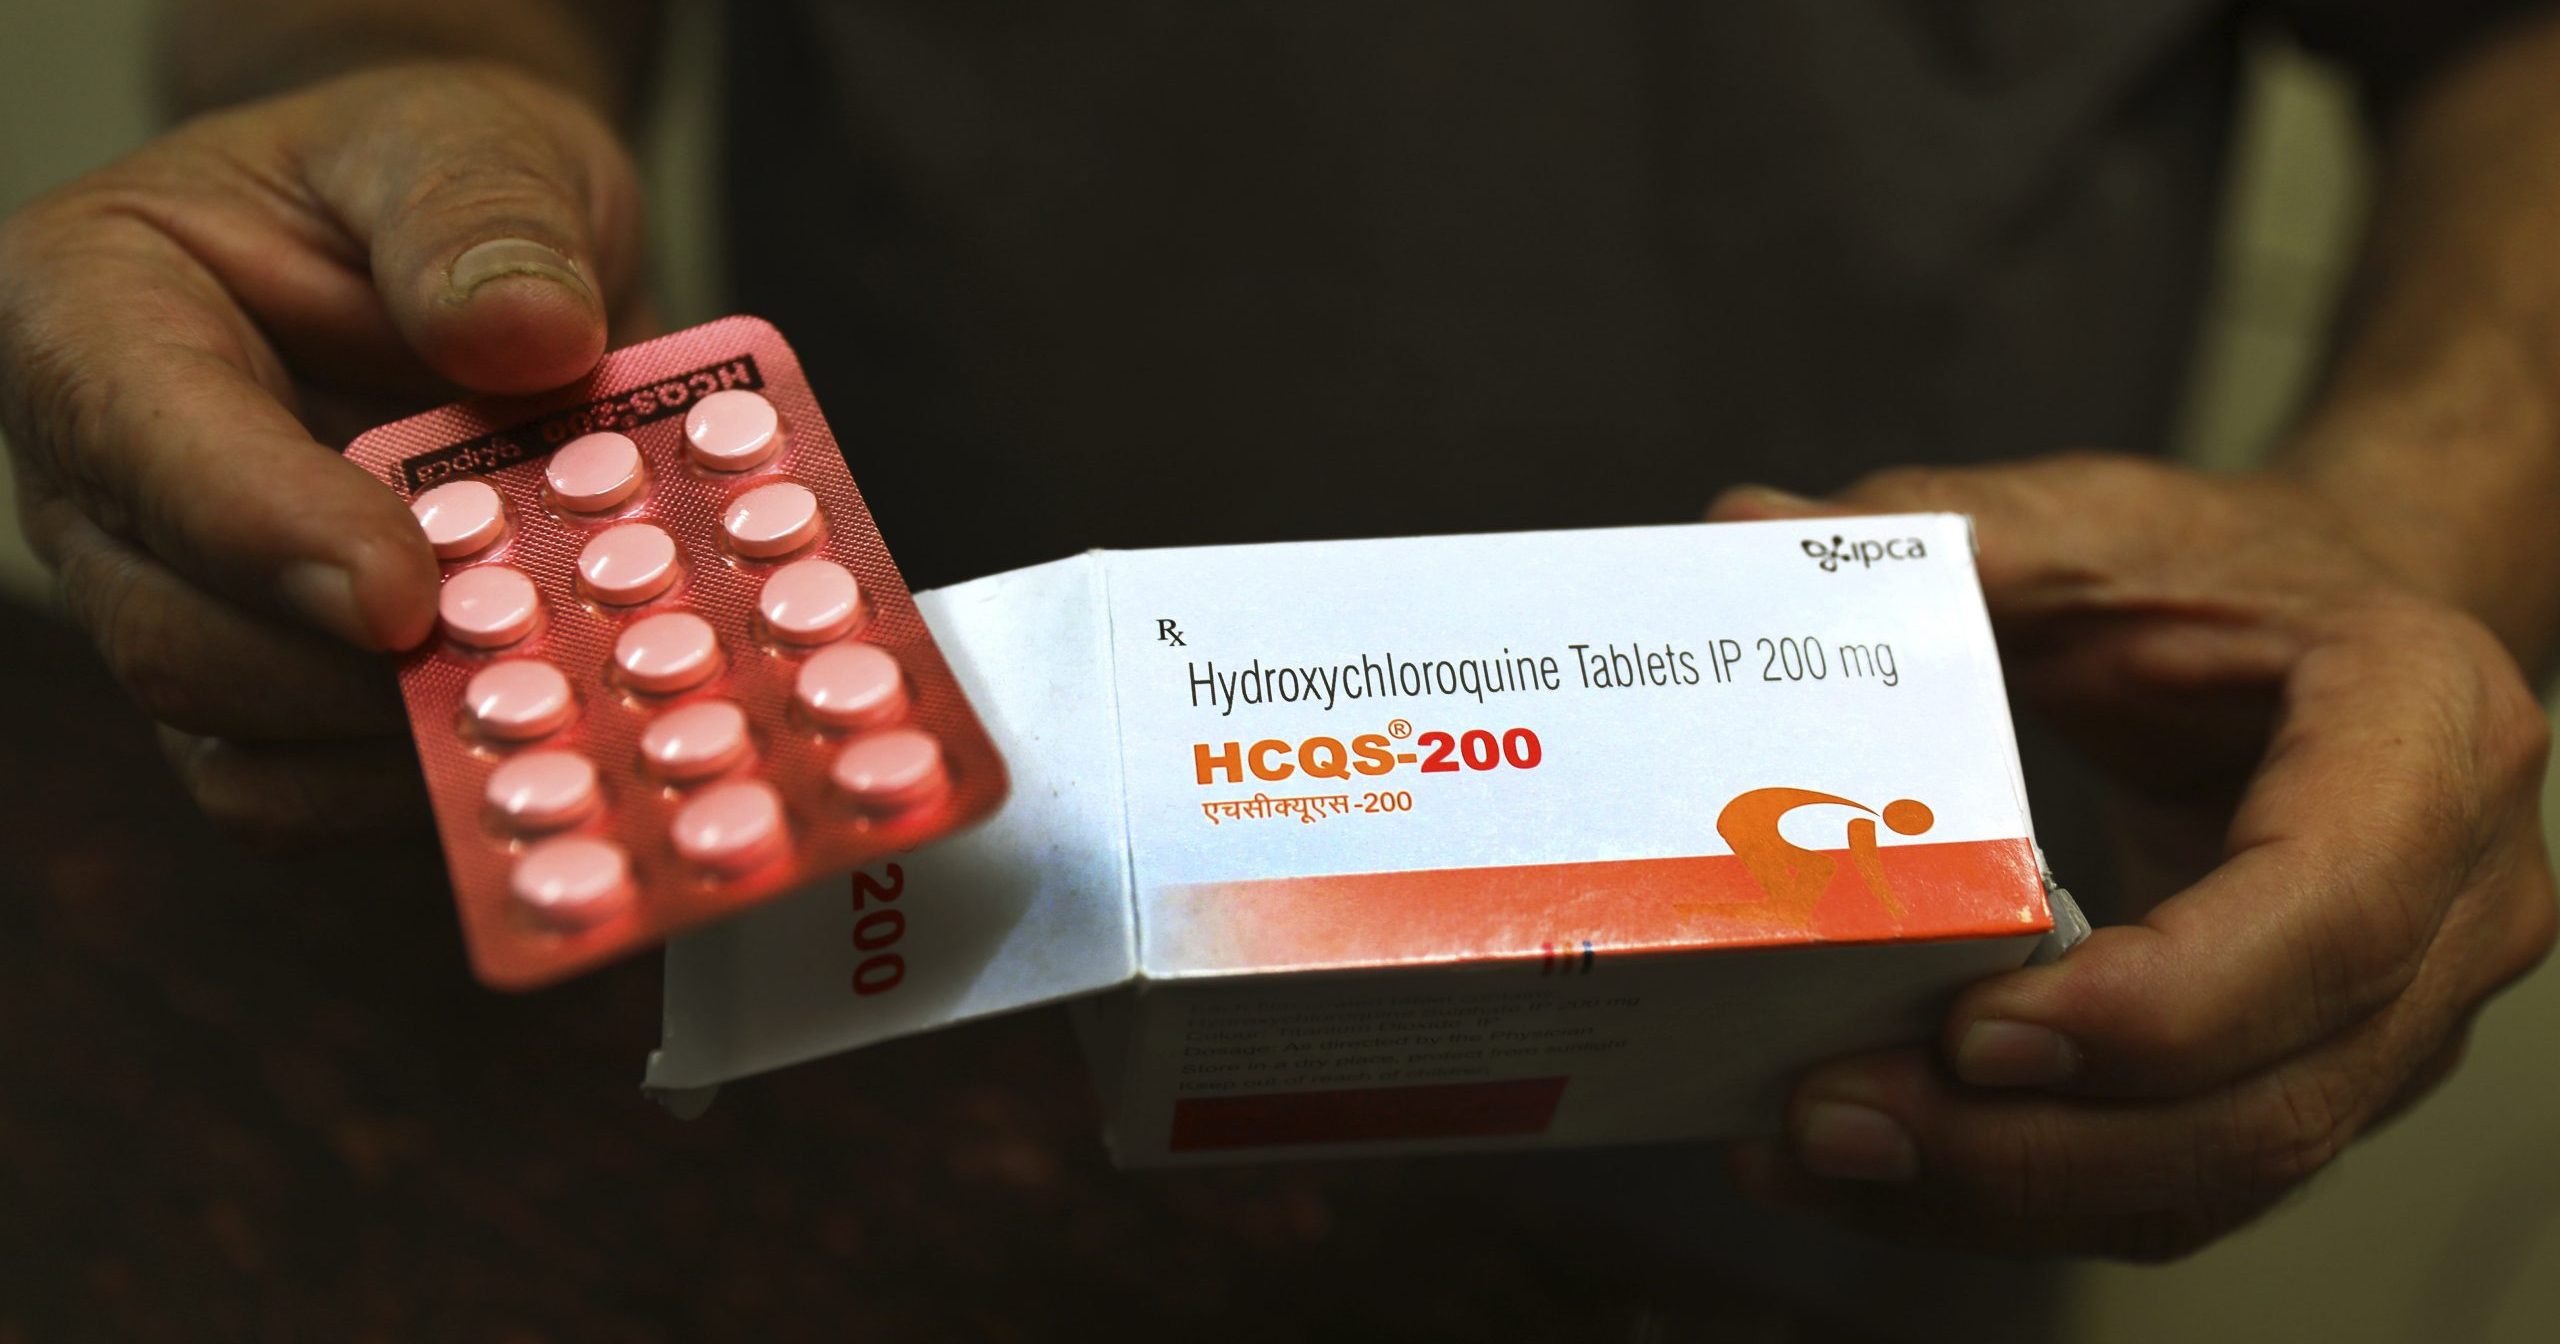 A chemist displays hydroxychloroquine tablets in New Delhi, India, on April 9, 2020.